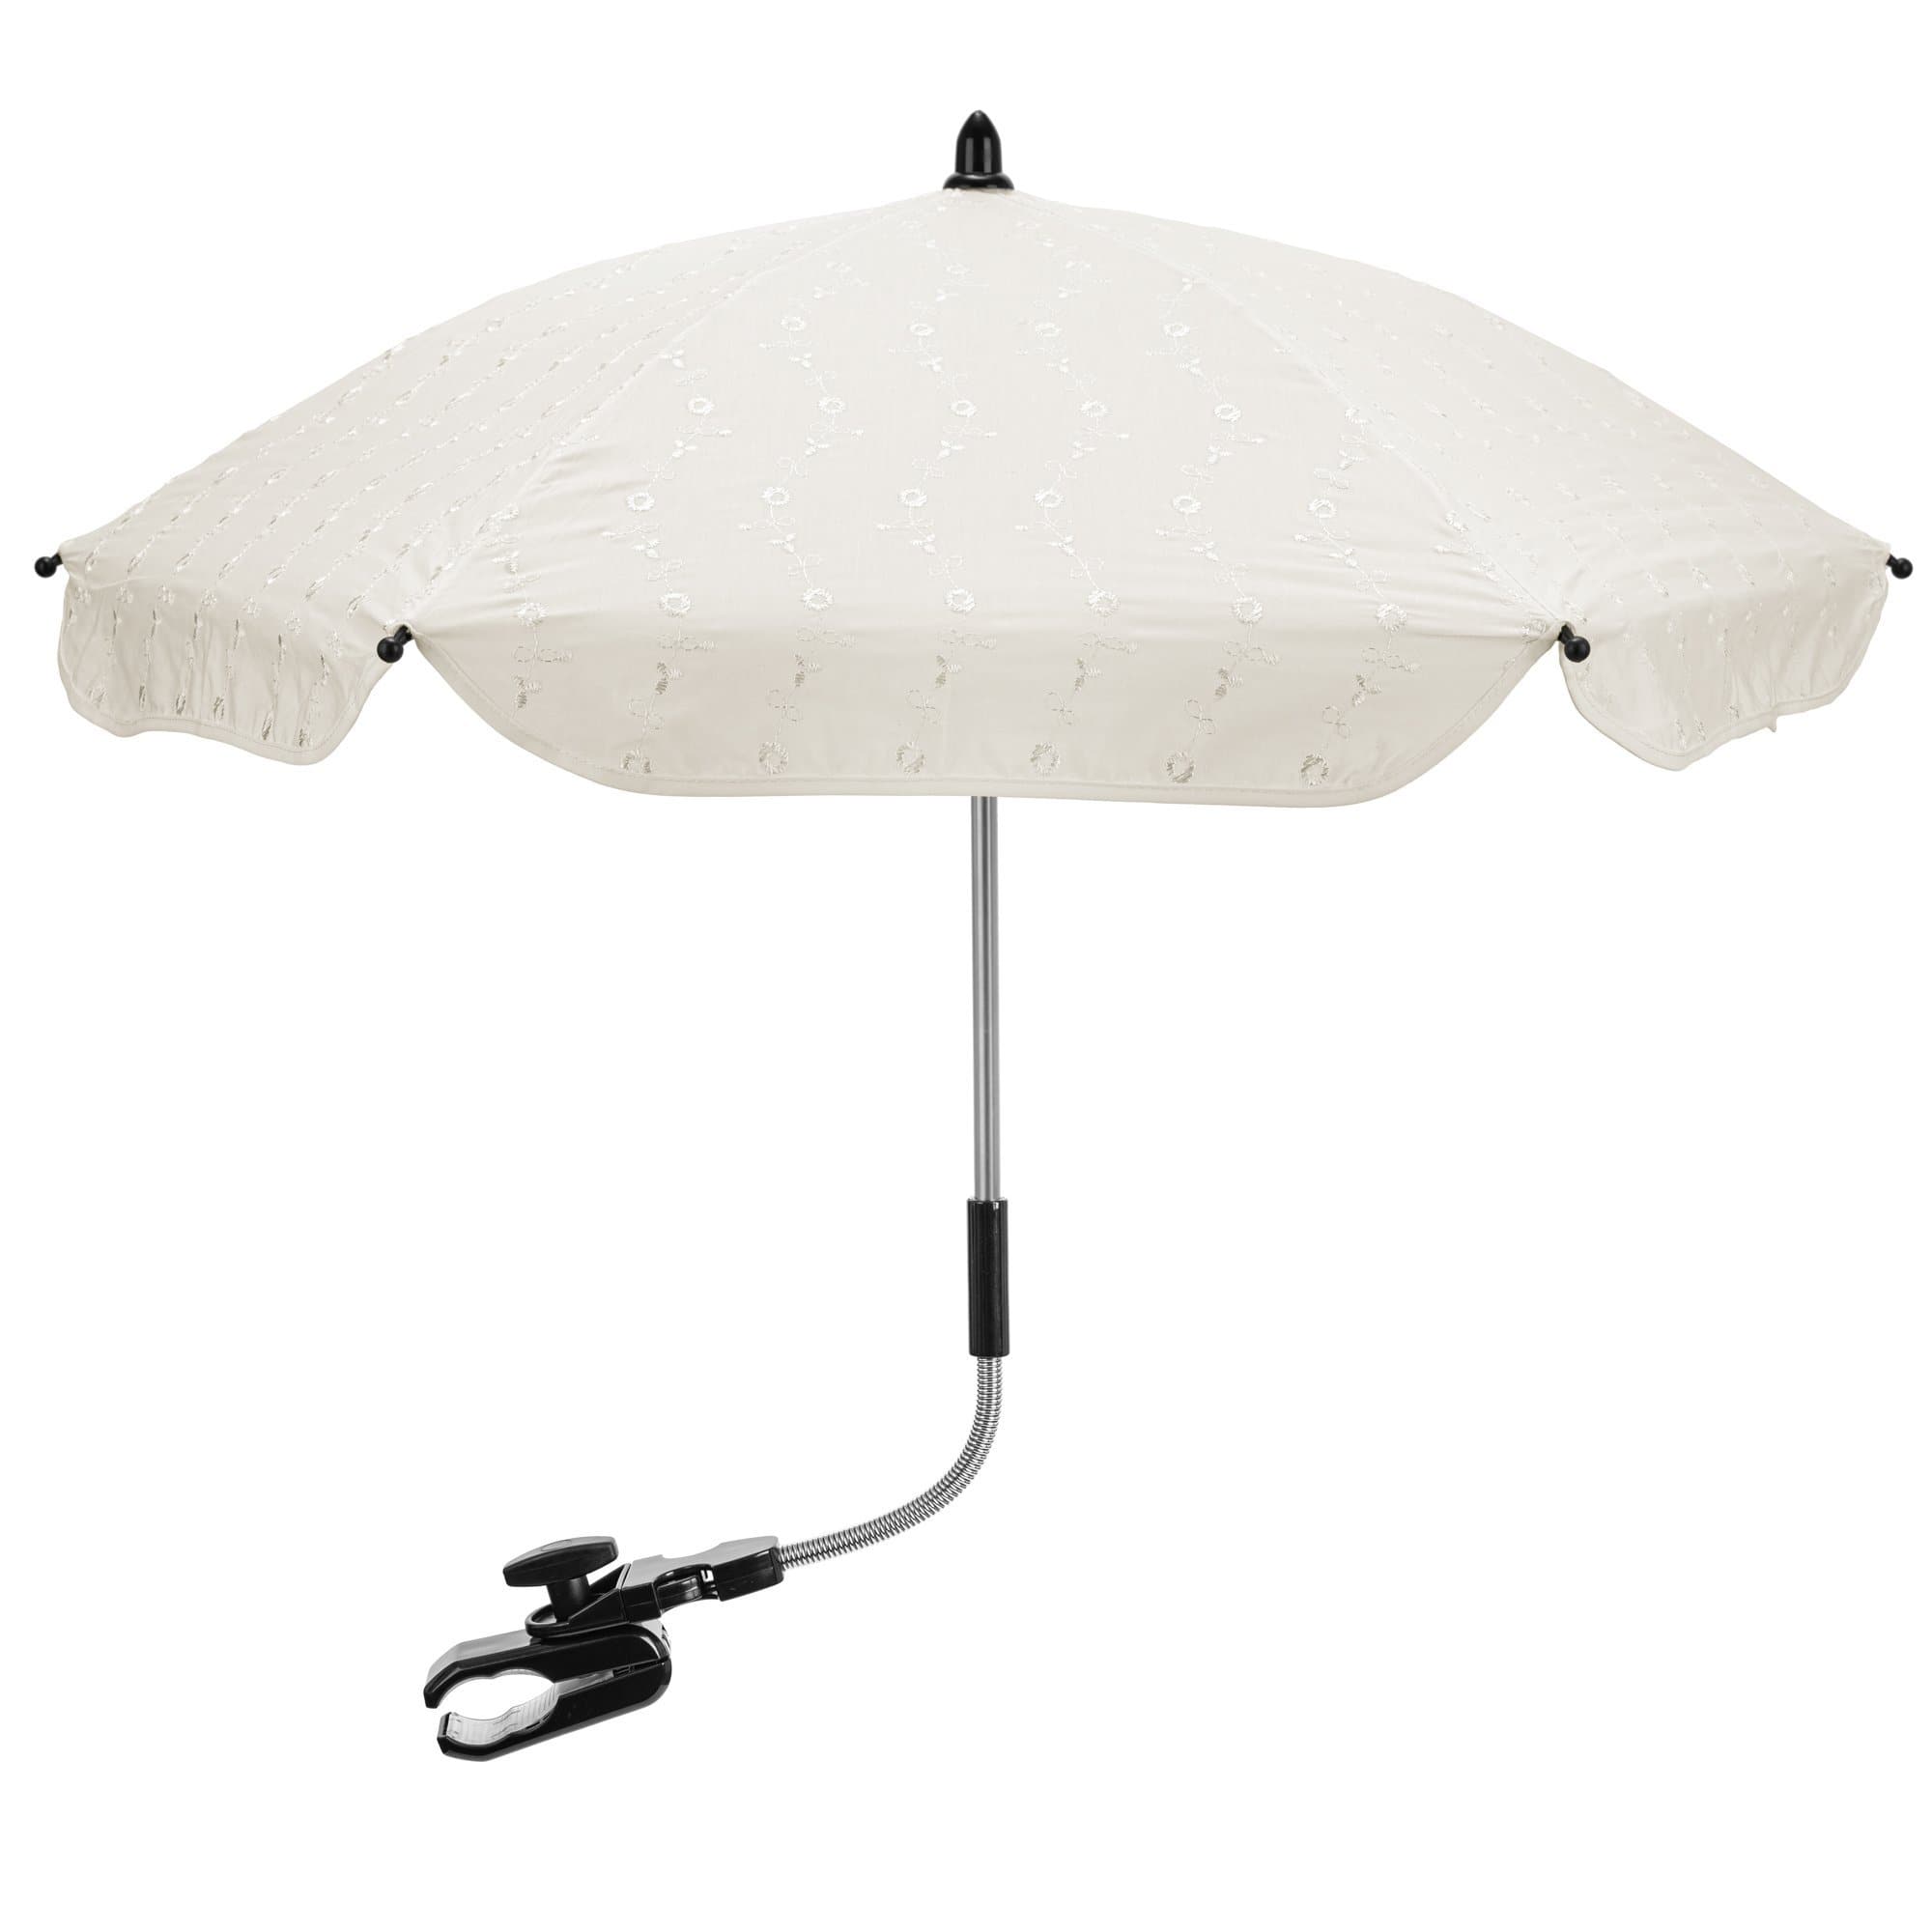 Broderie Anglaise Parasol Compatible with Babyzen - Cream / Fits All Models | For Your Little One